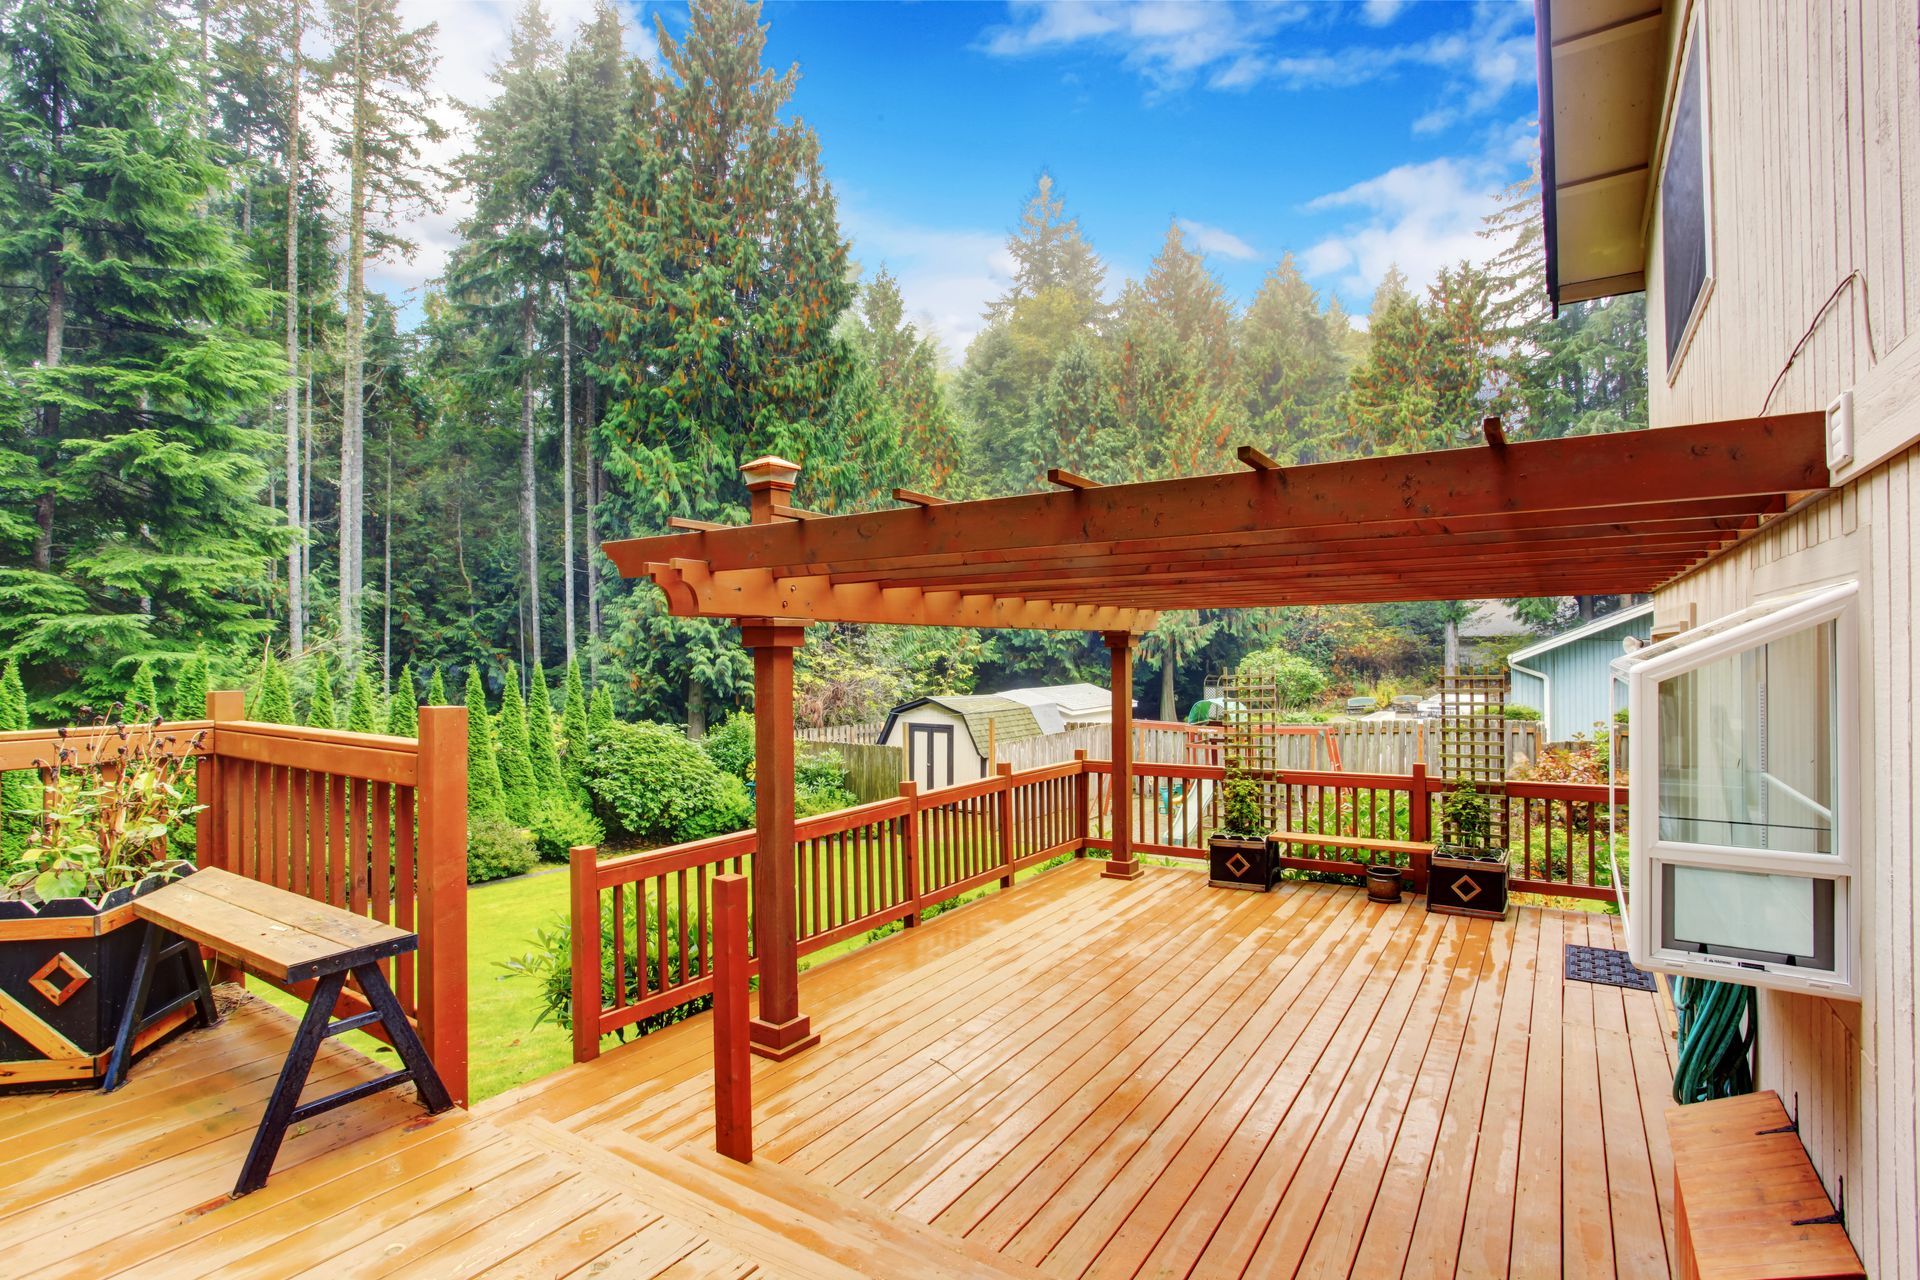 A wooden walkout deck with an attached pergola providing shade and relaxation space.